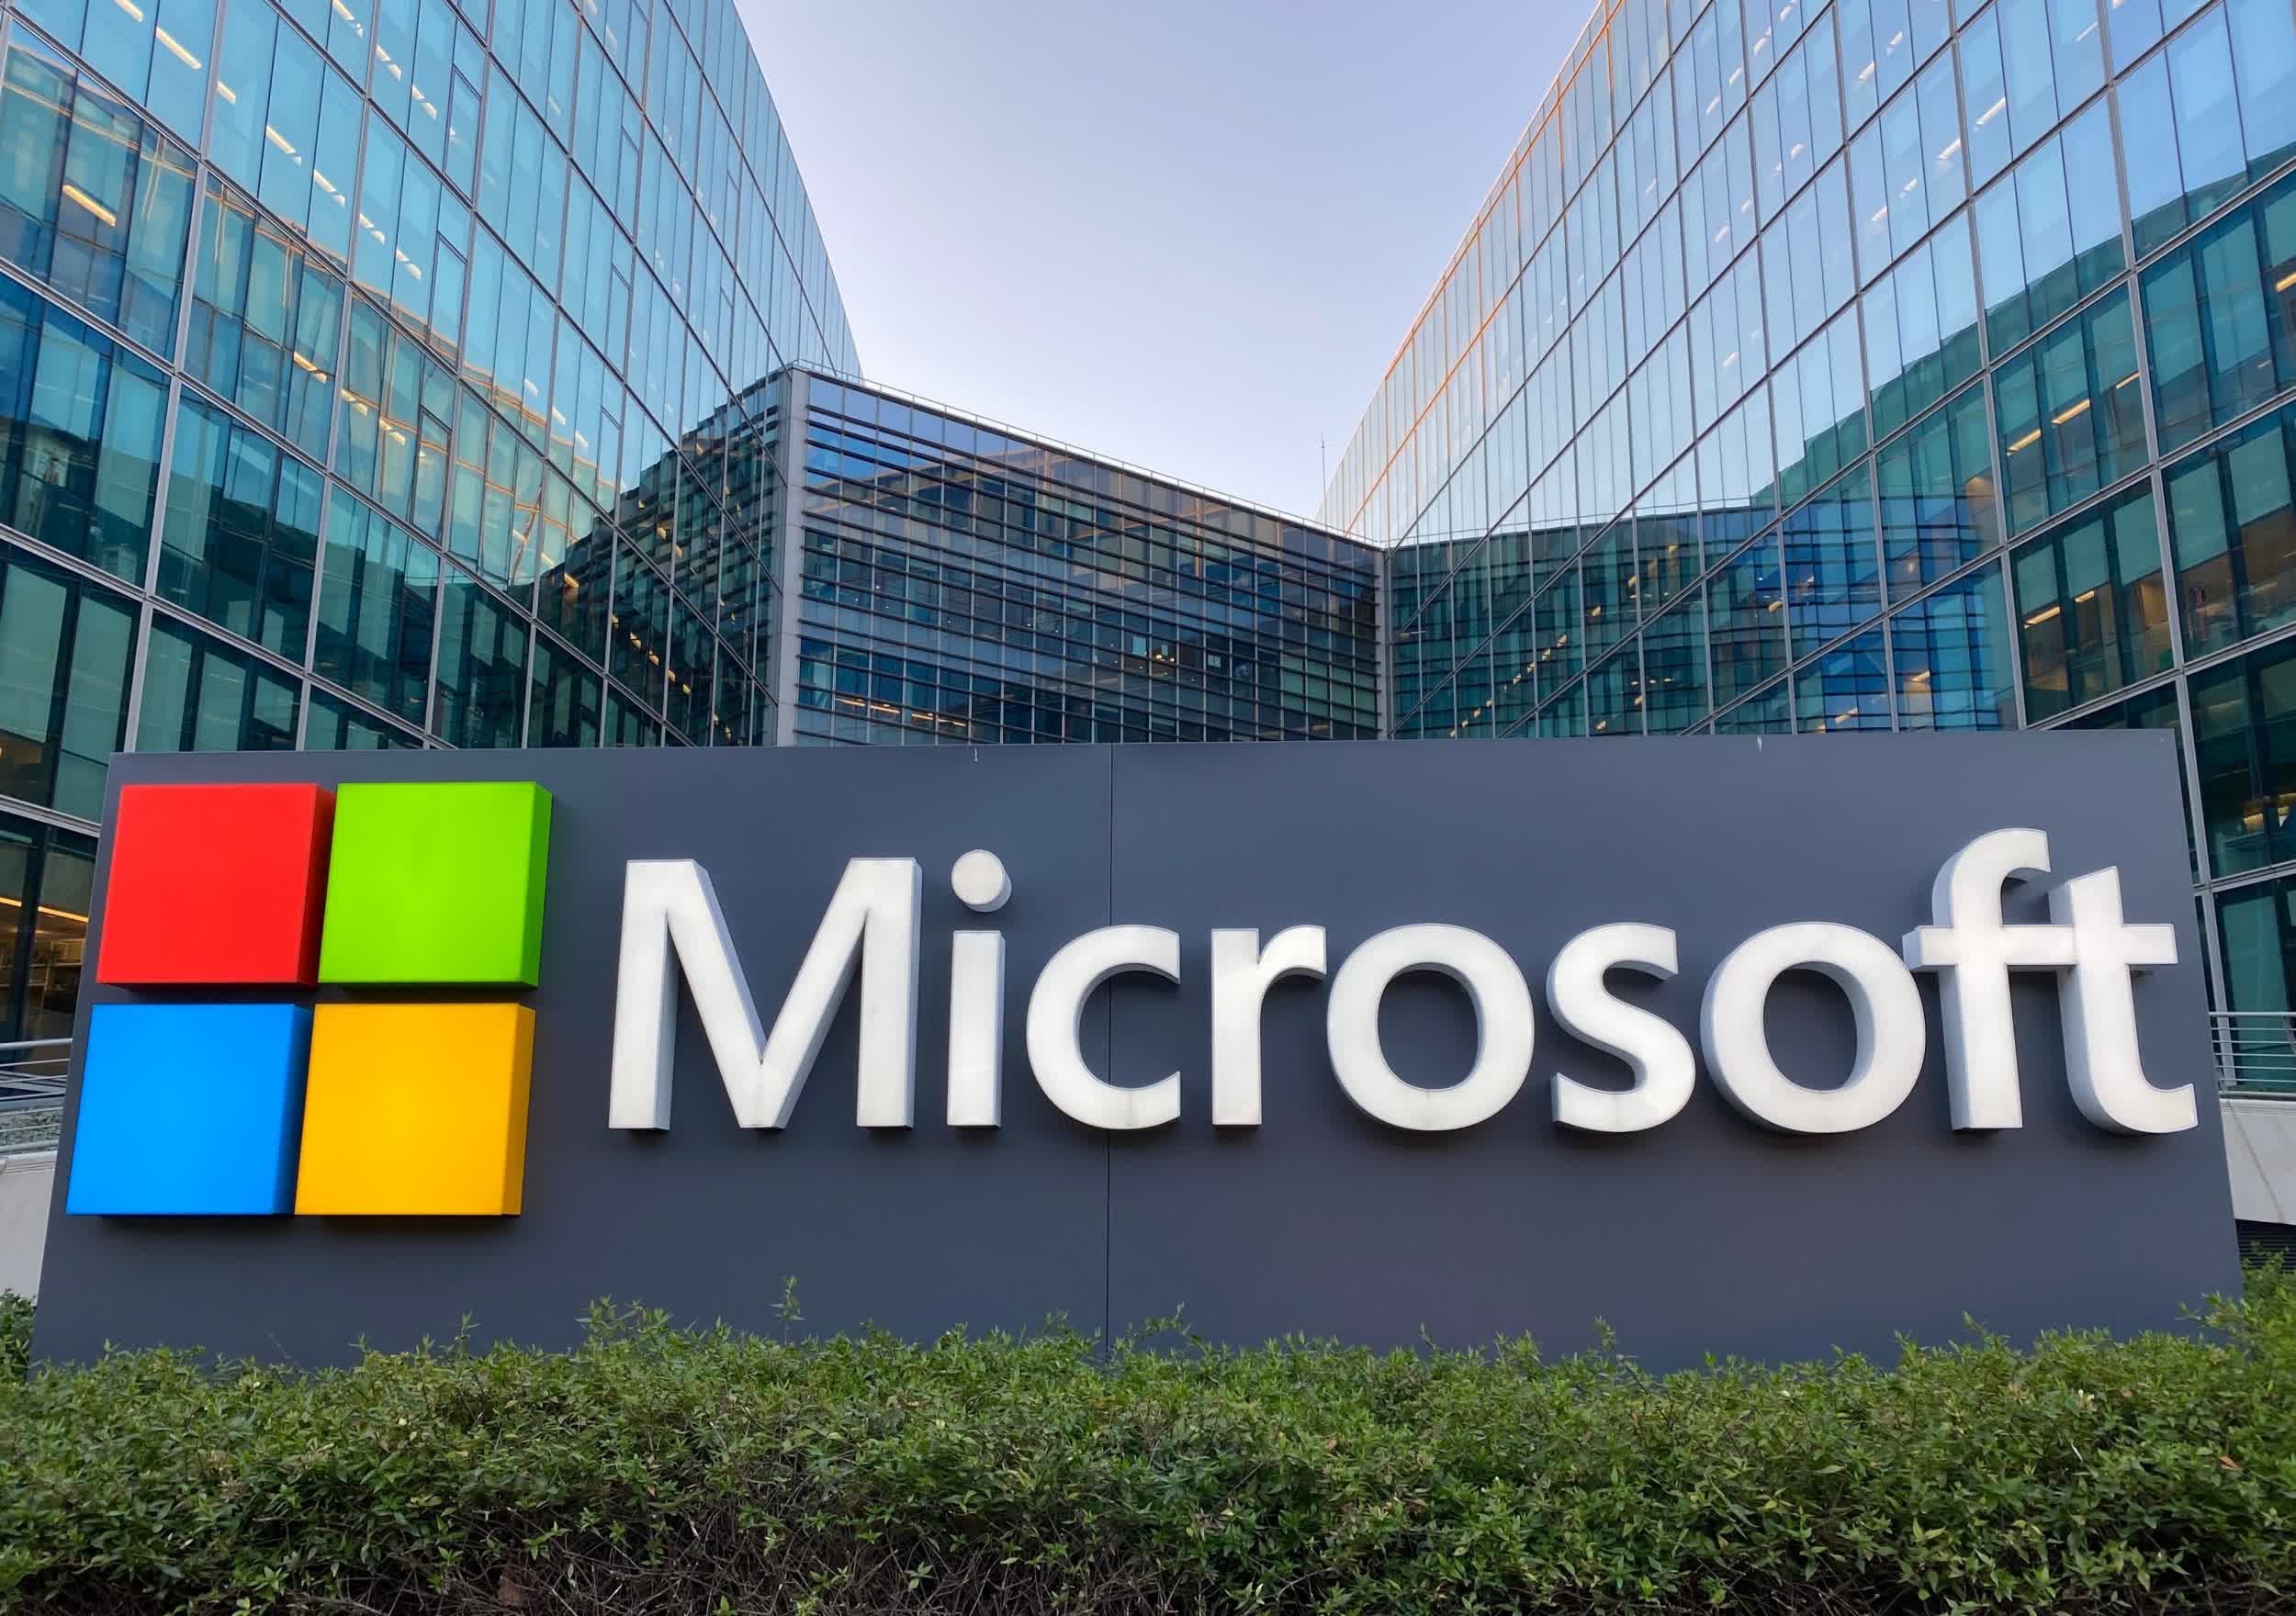 Microsoft details hybrid workplace strategy for the future of work